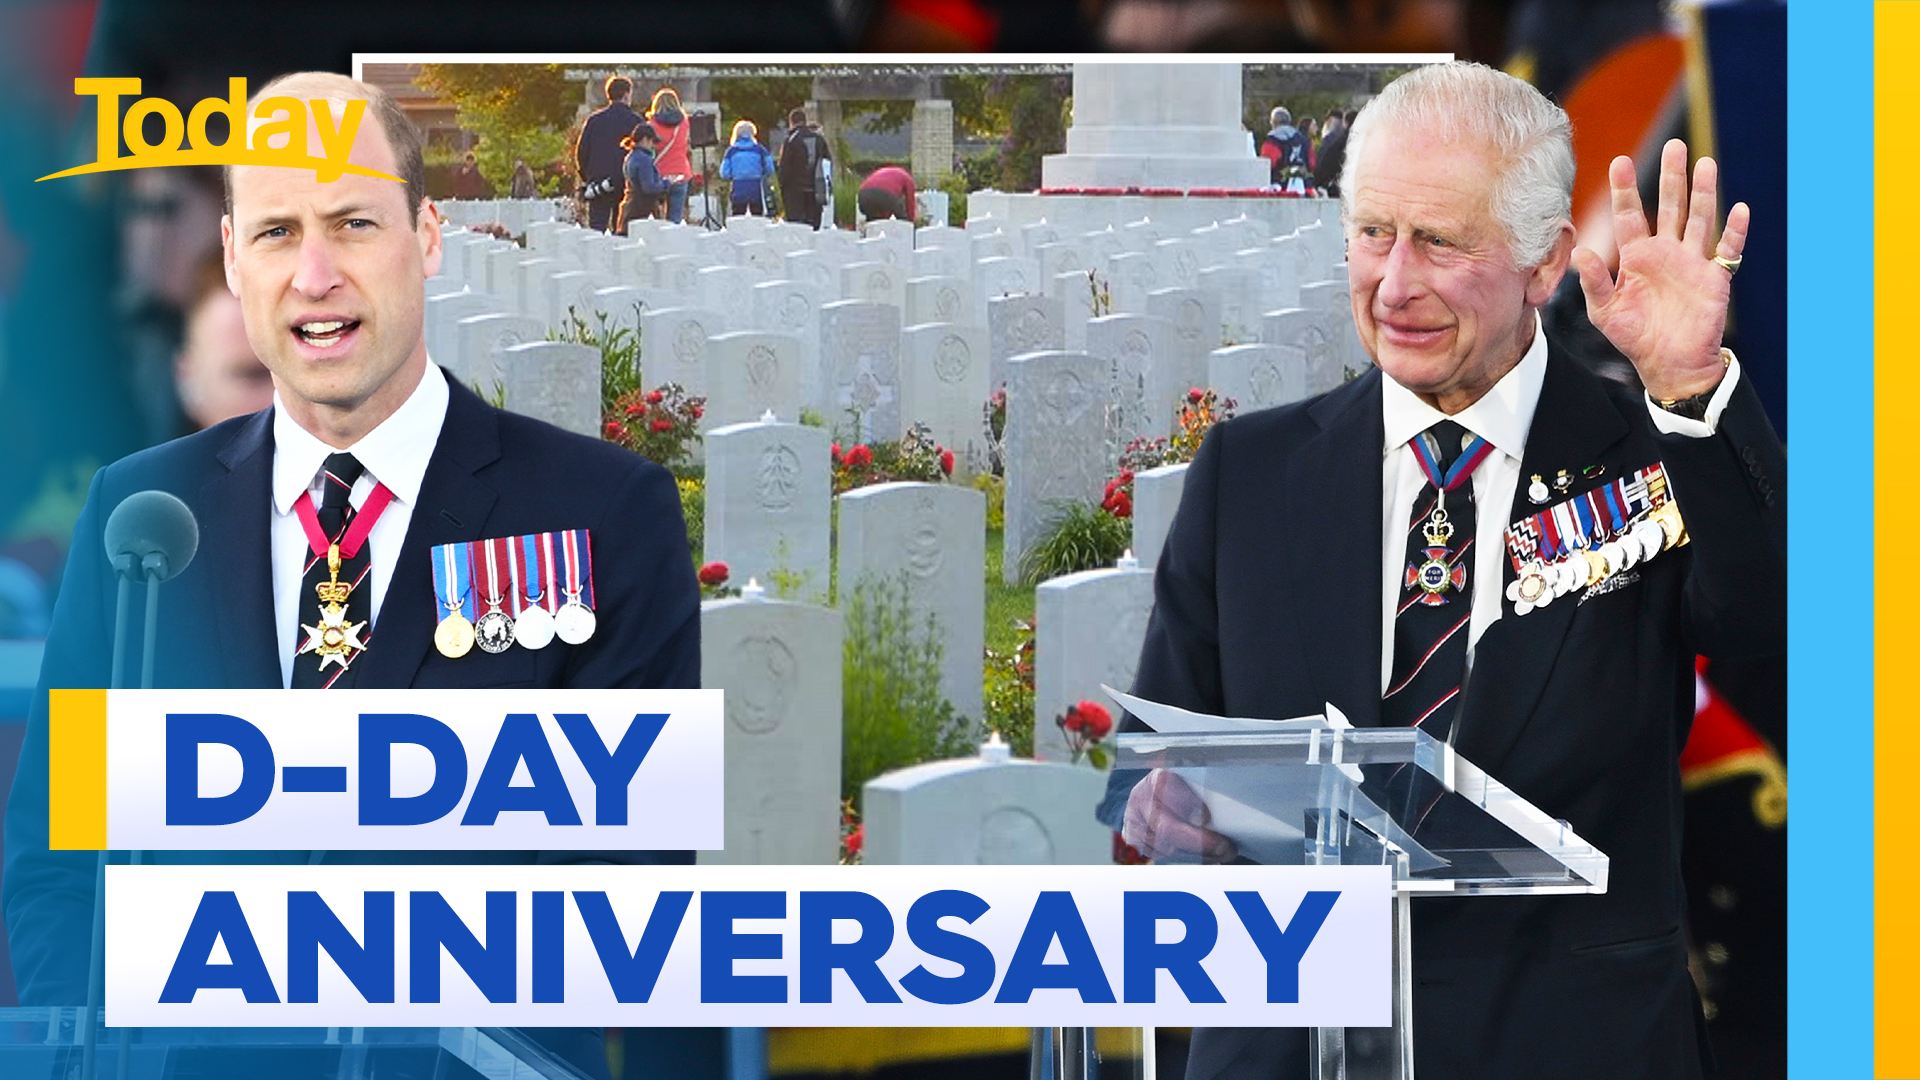 King Charles and Prince William commemorate D-Day anniversary